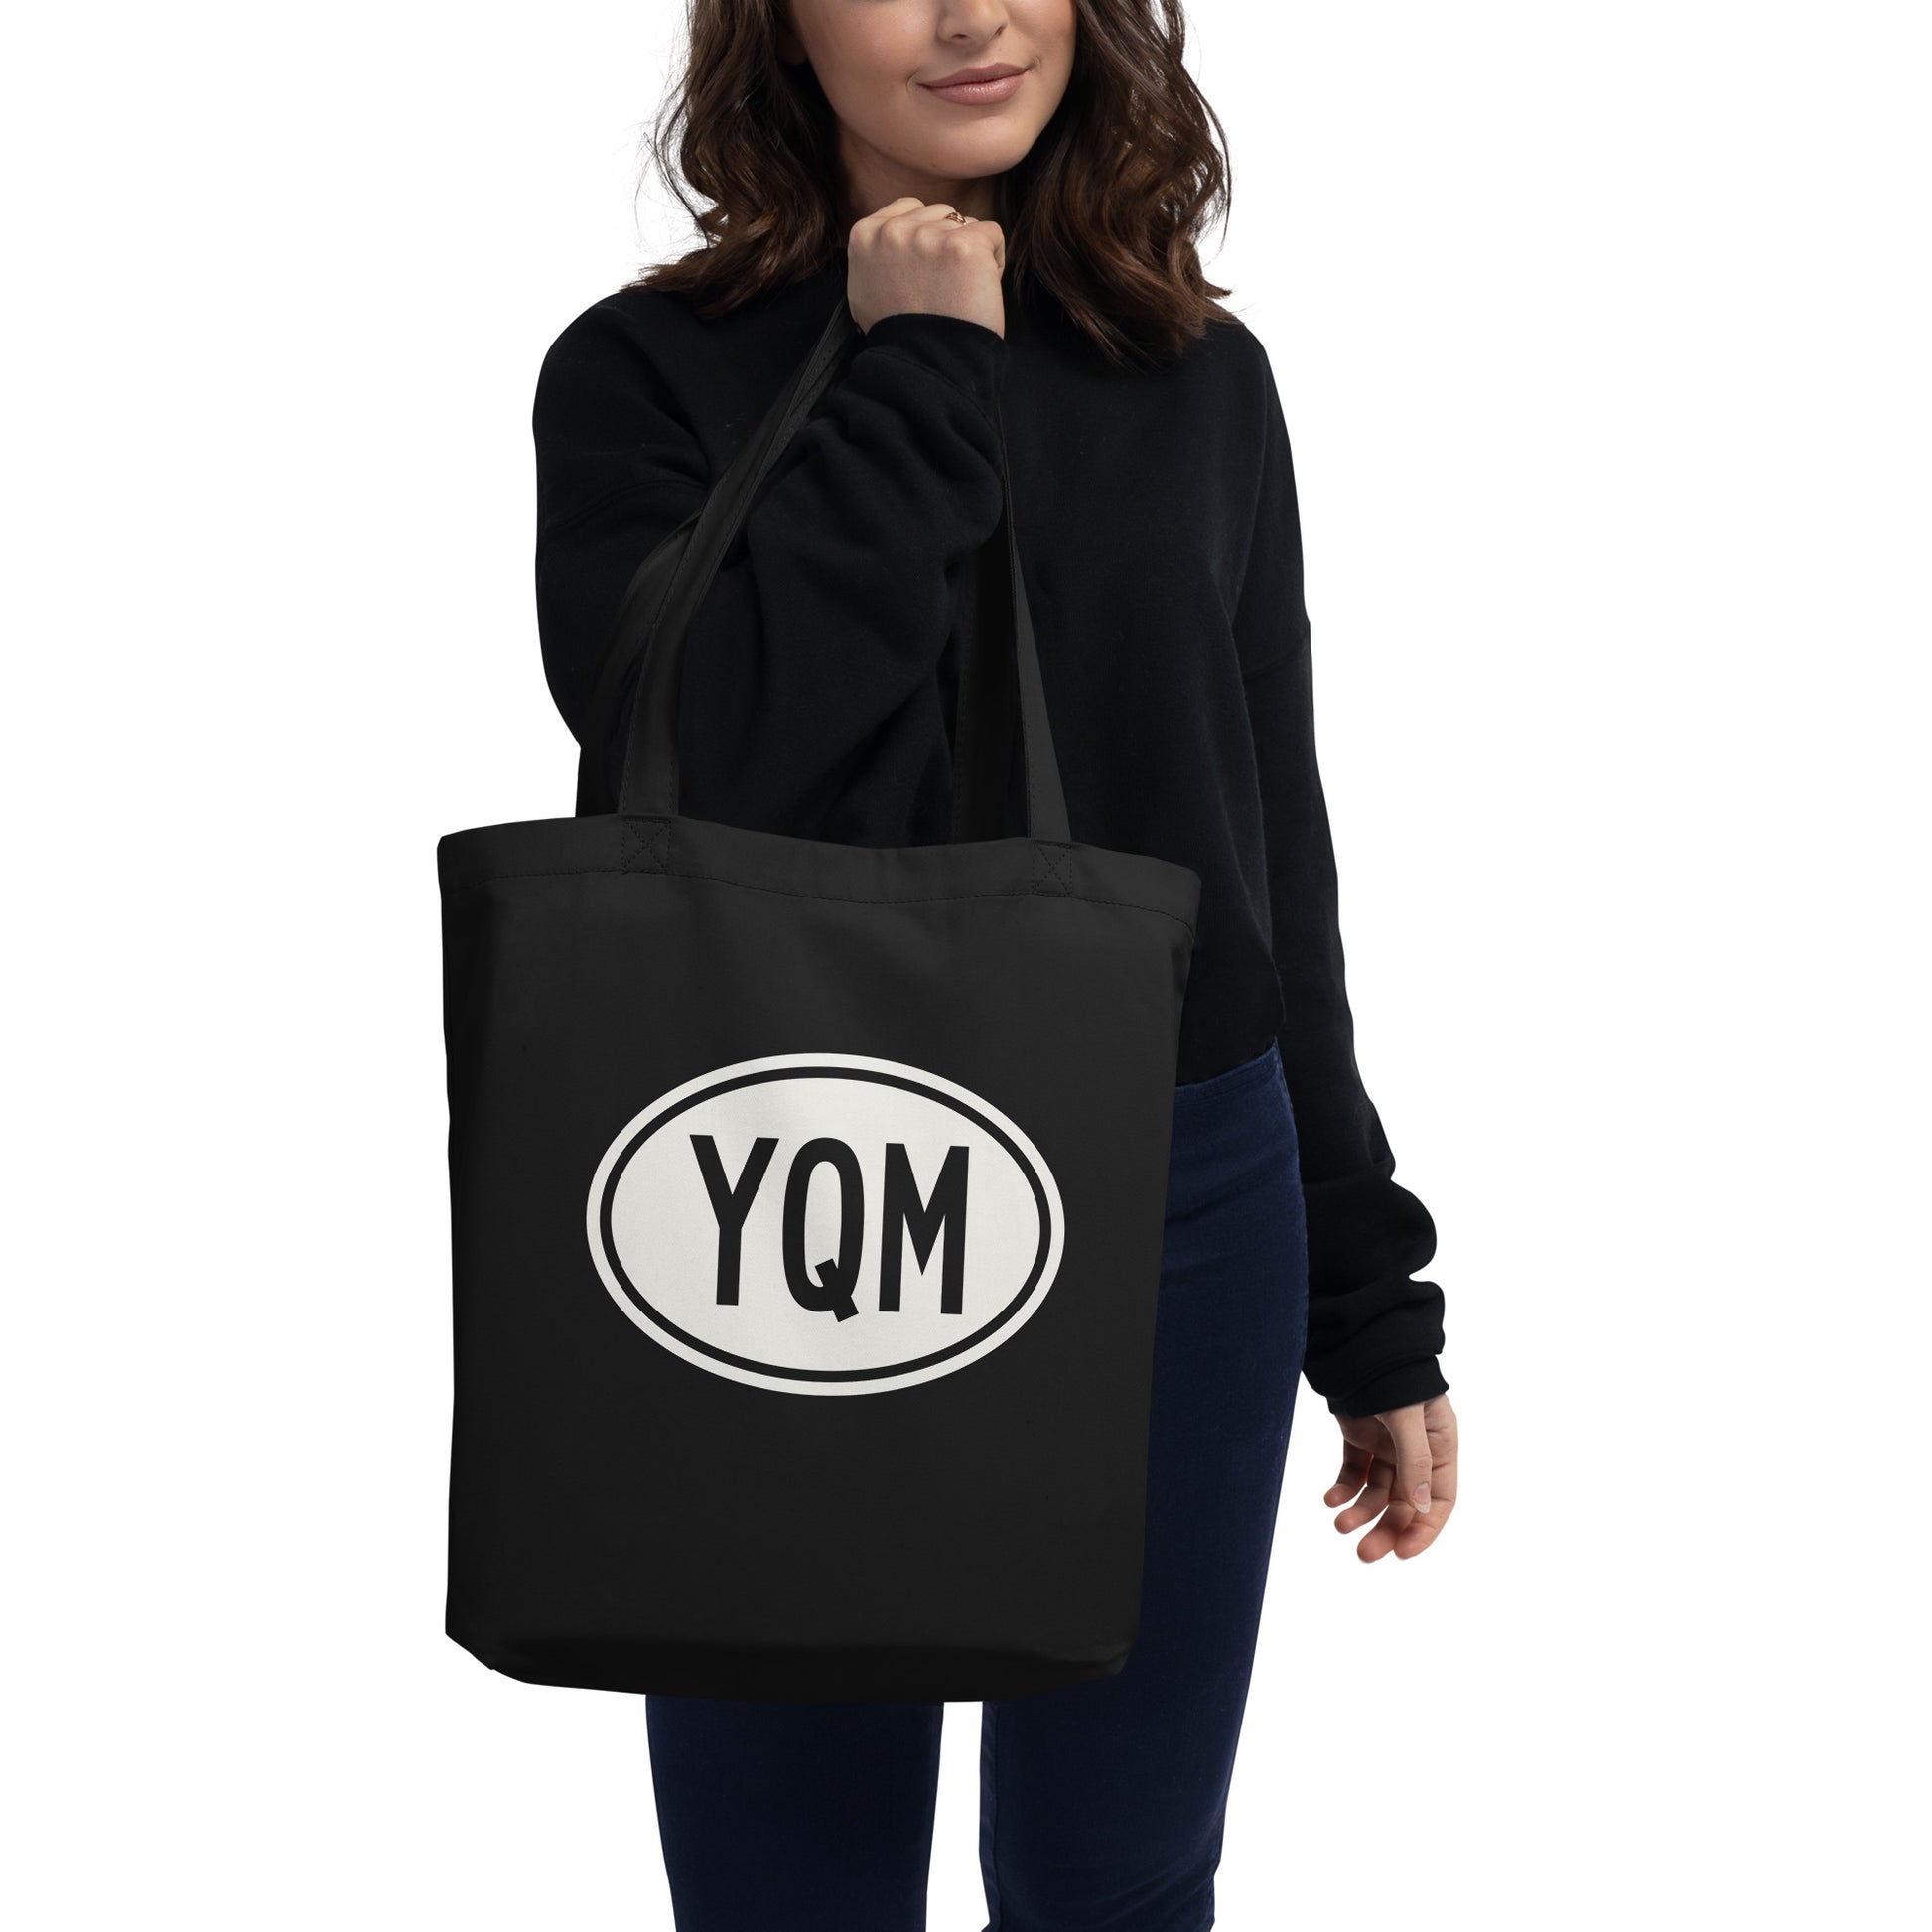 Unique Travel Gift Organic Tote - White Oval • YQM Moncton • YHM Designs - Image 03